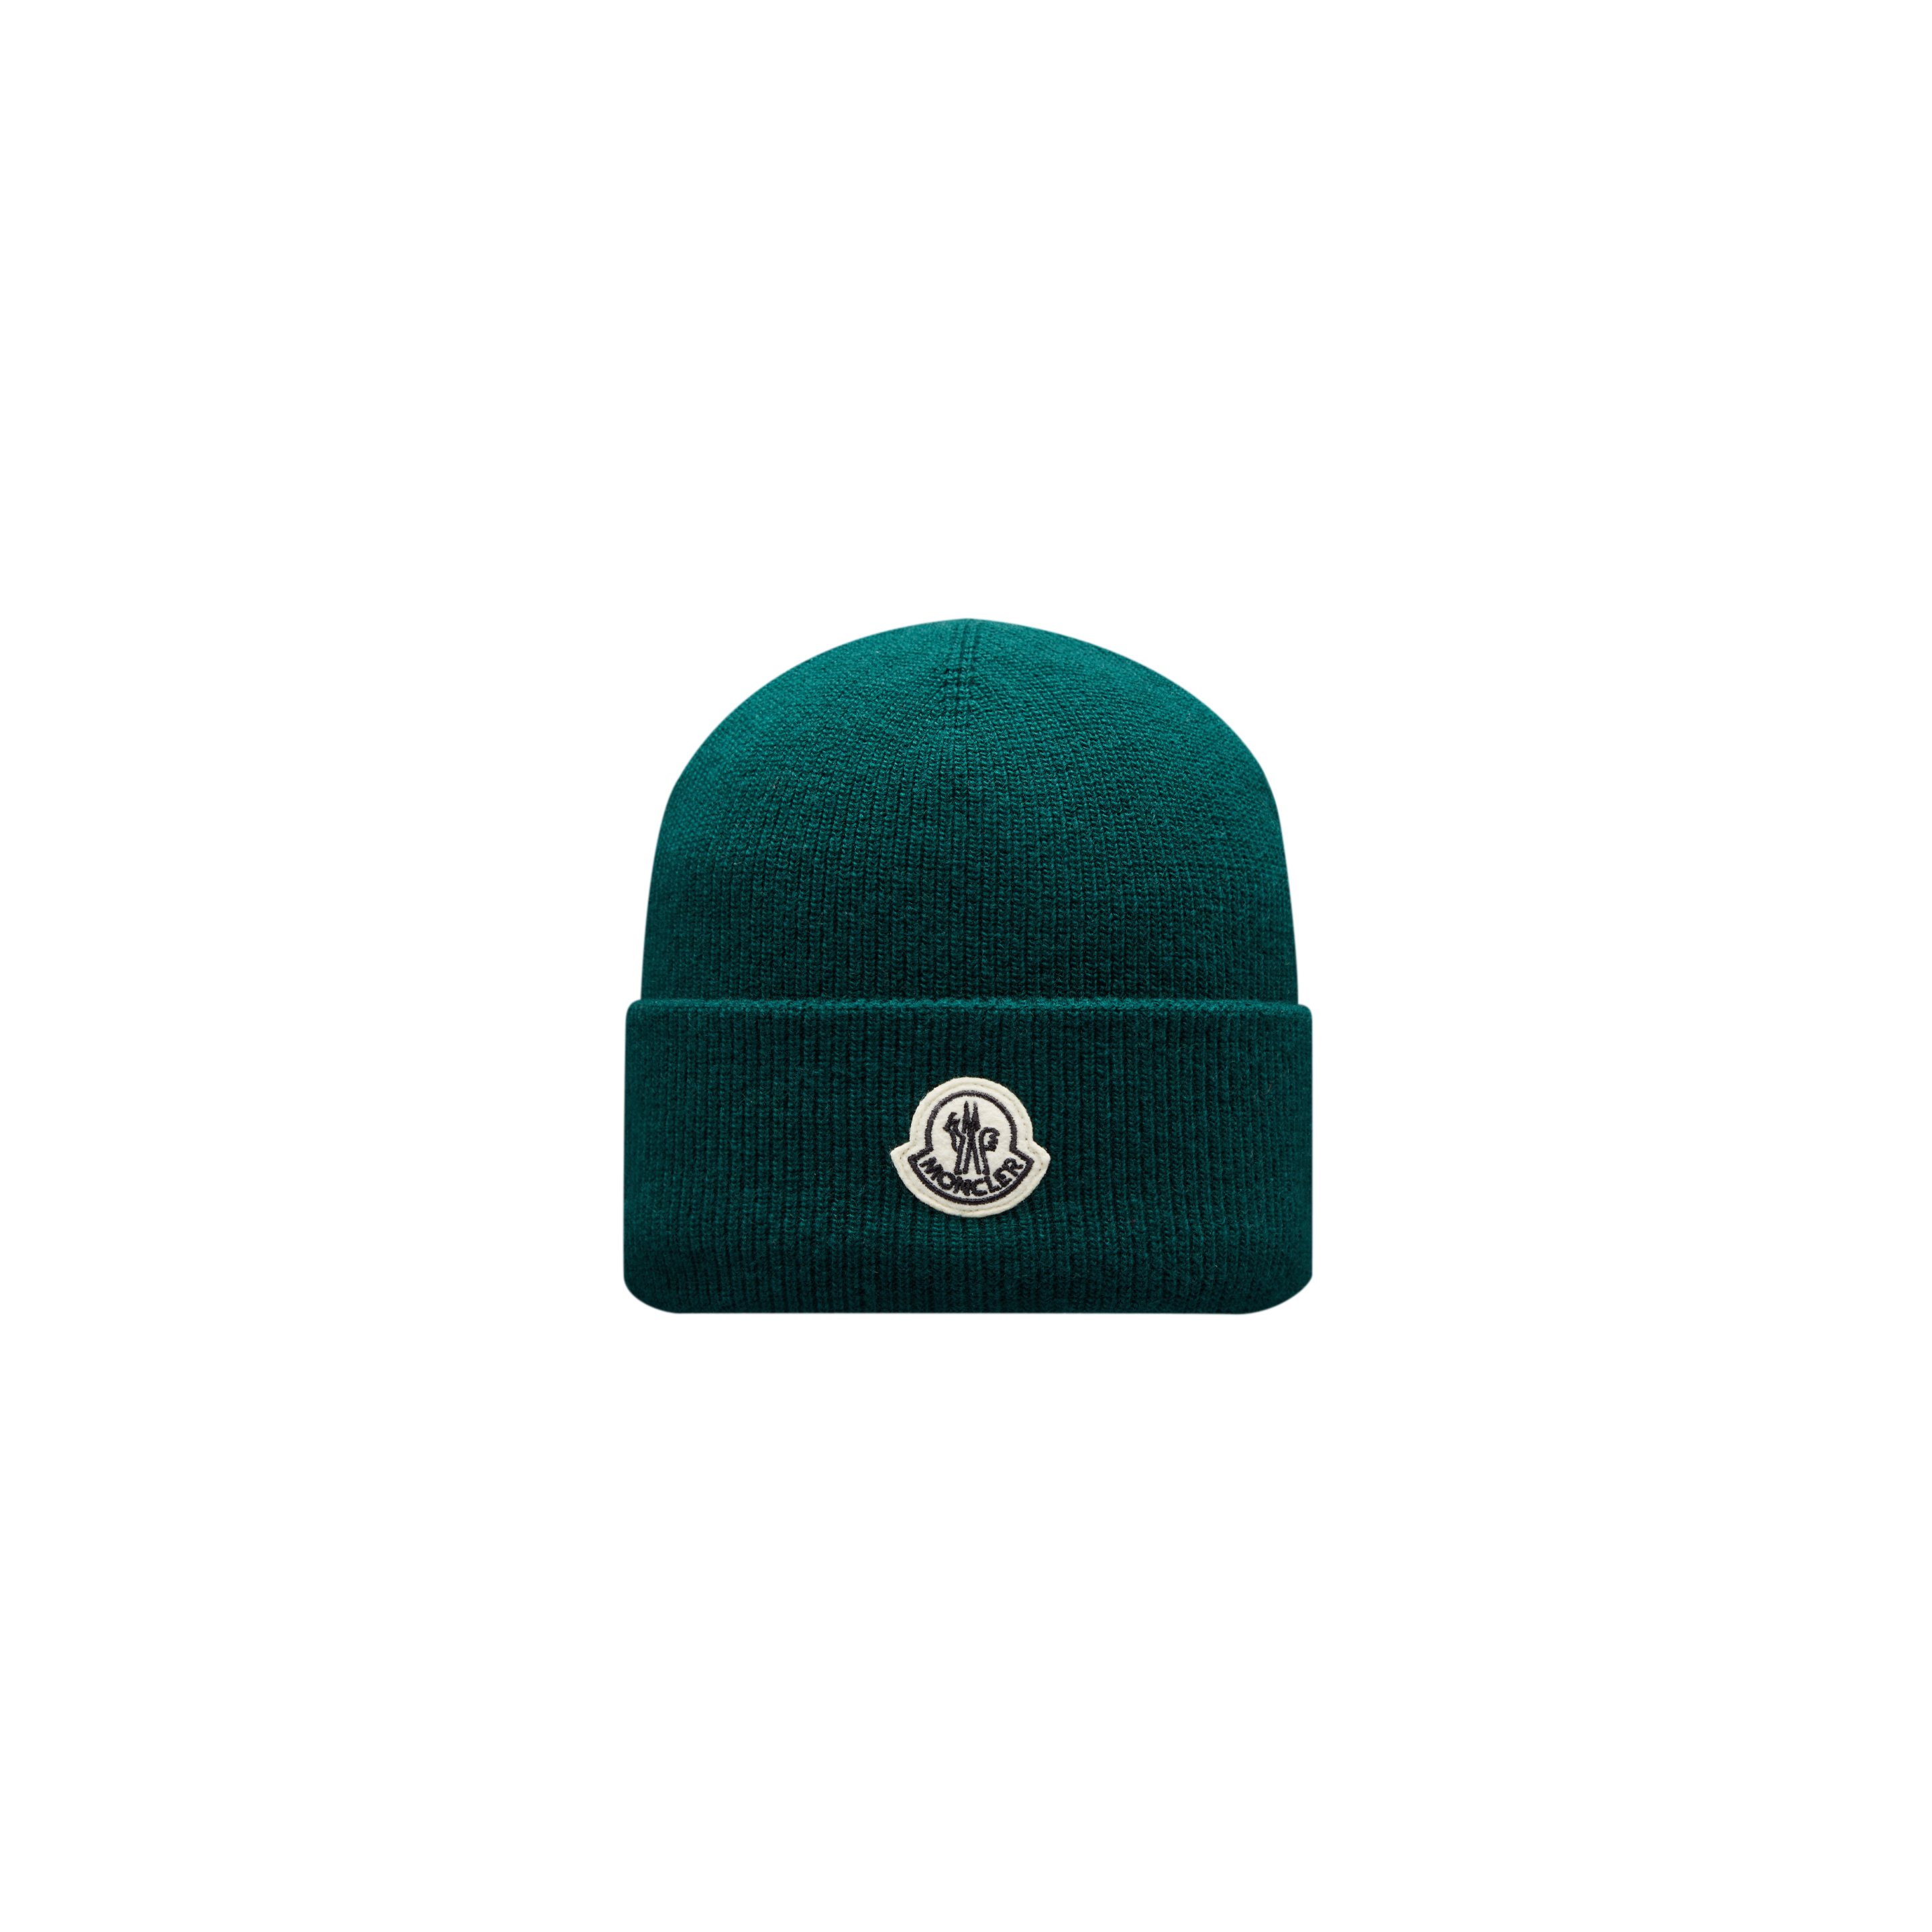 Moncler Genius Wool Beanie Green Size One Size